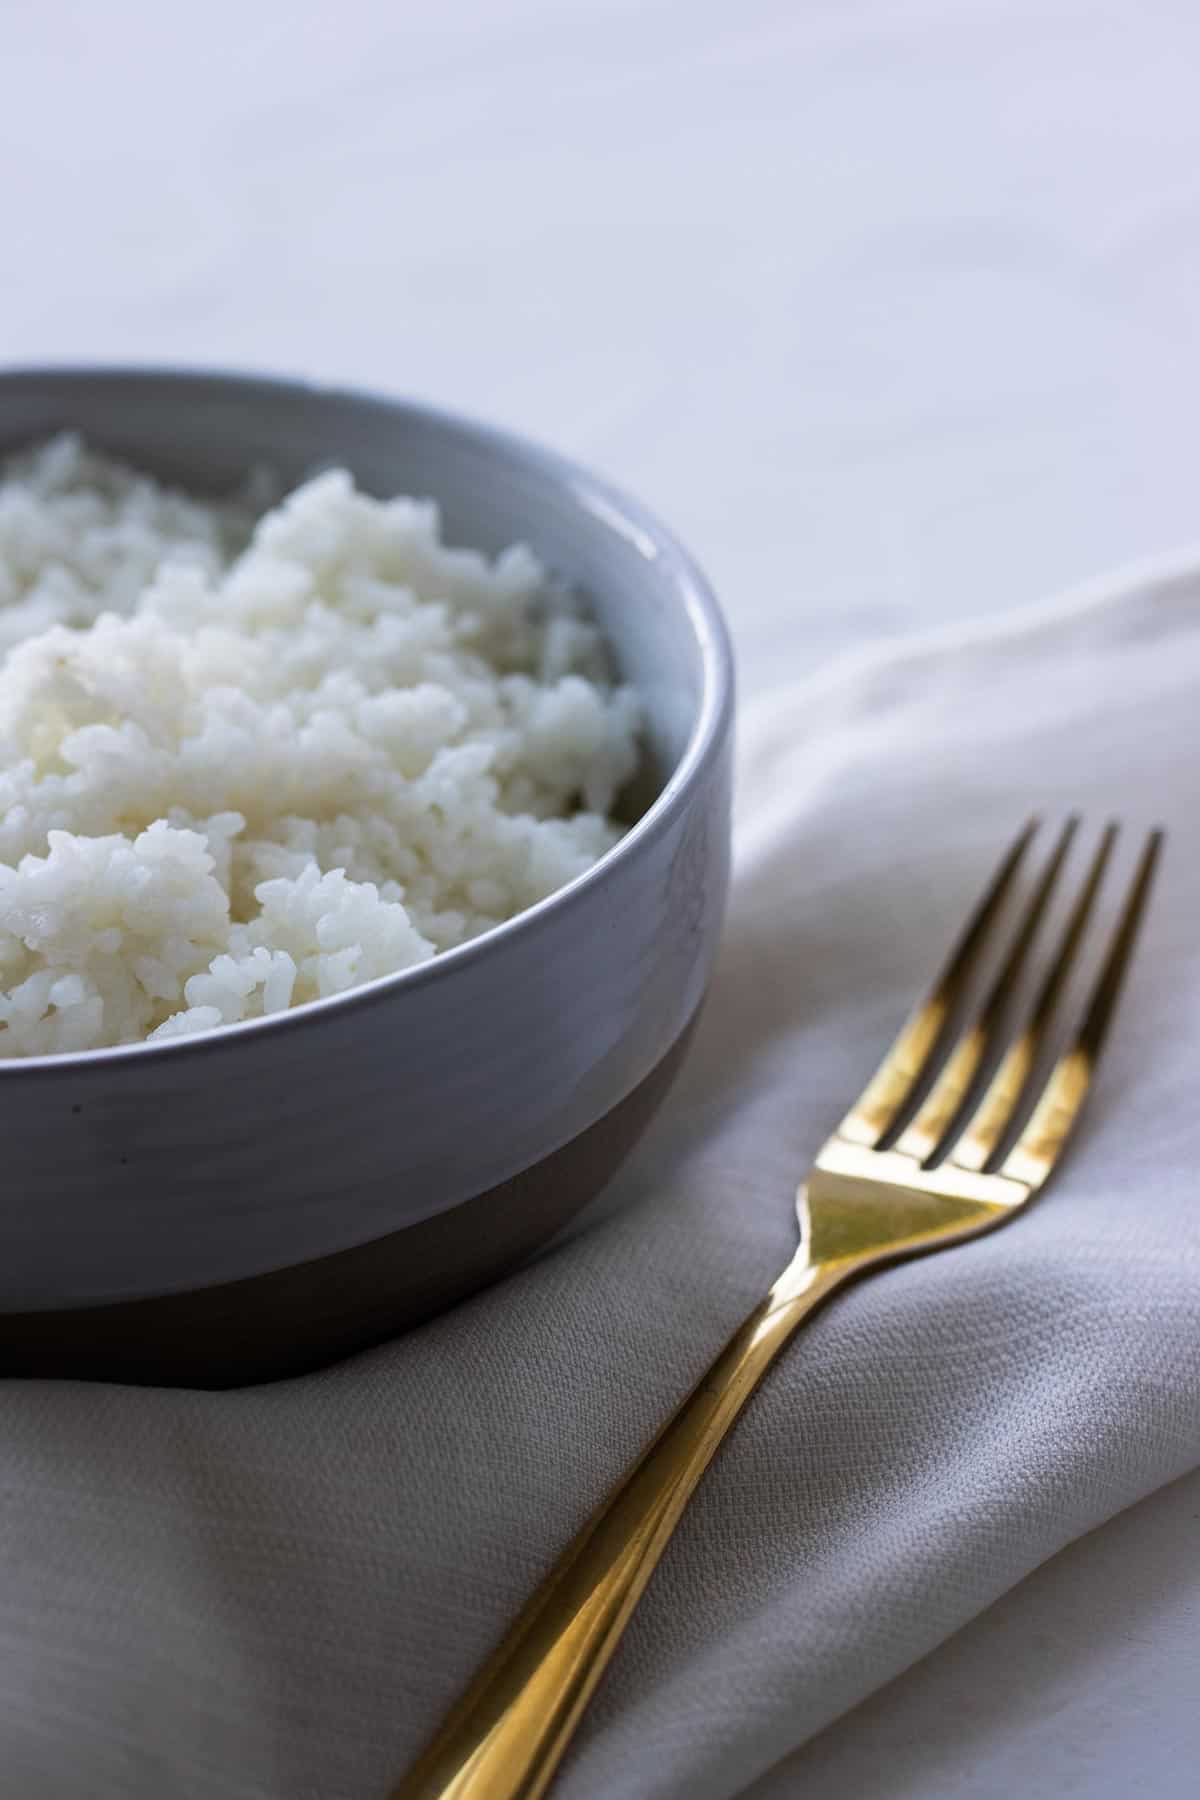 close up of a bowl of white rice and a golden fork next to it.